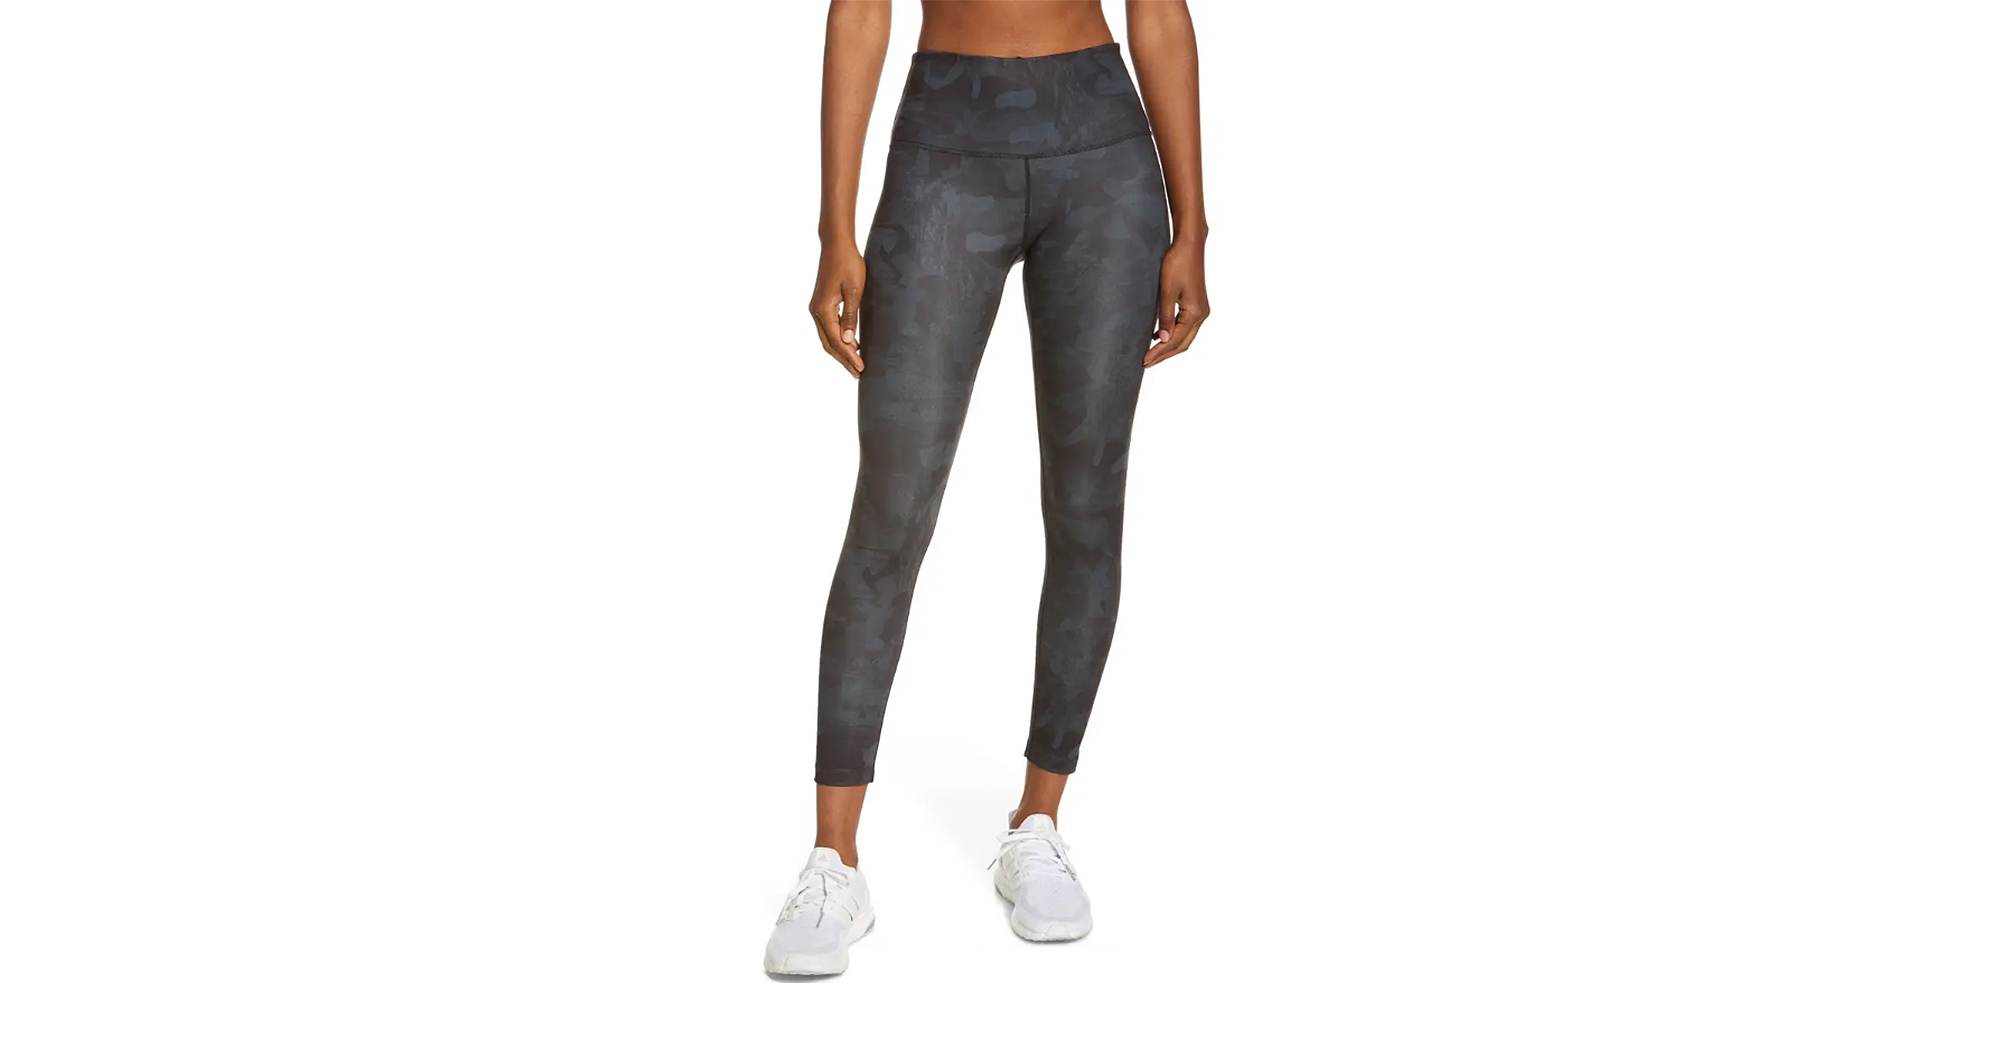 Zella vs Lululemon – Are They Really Just As Good As Each Other?